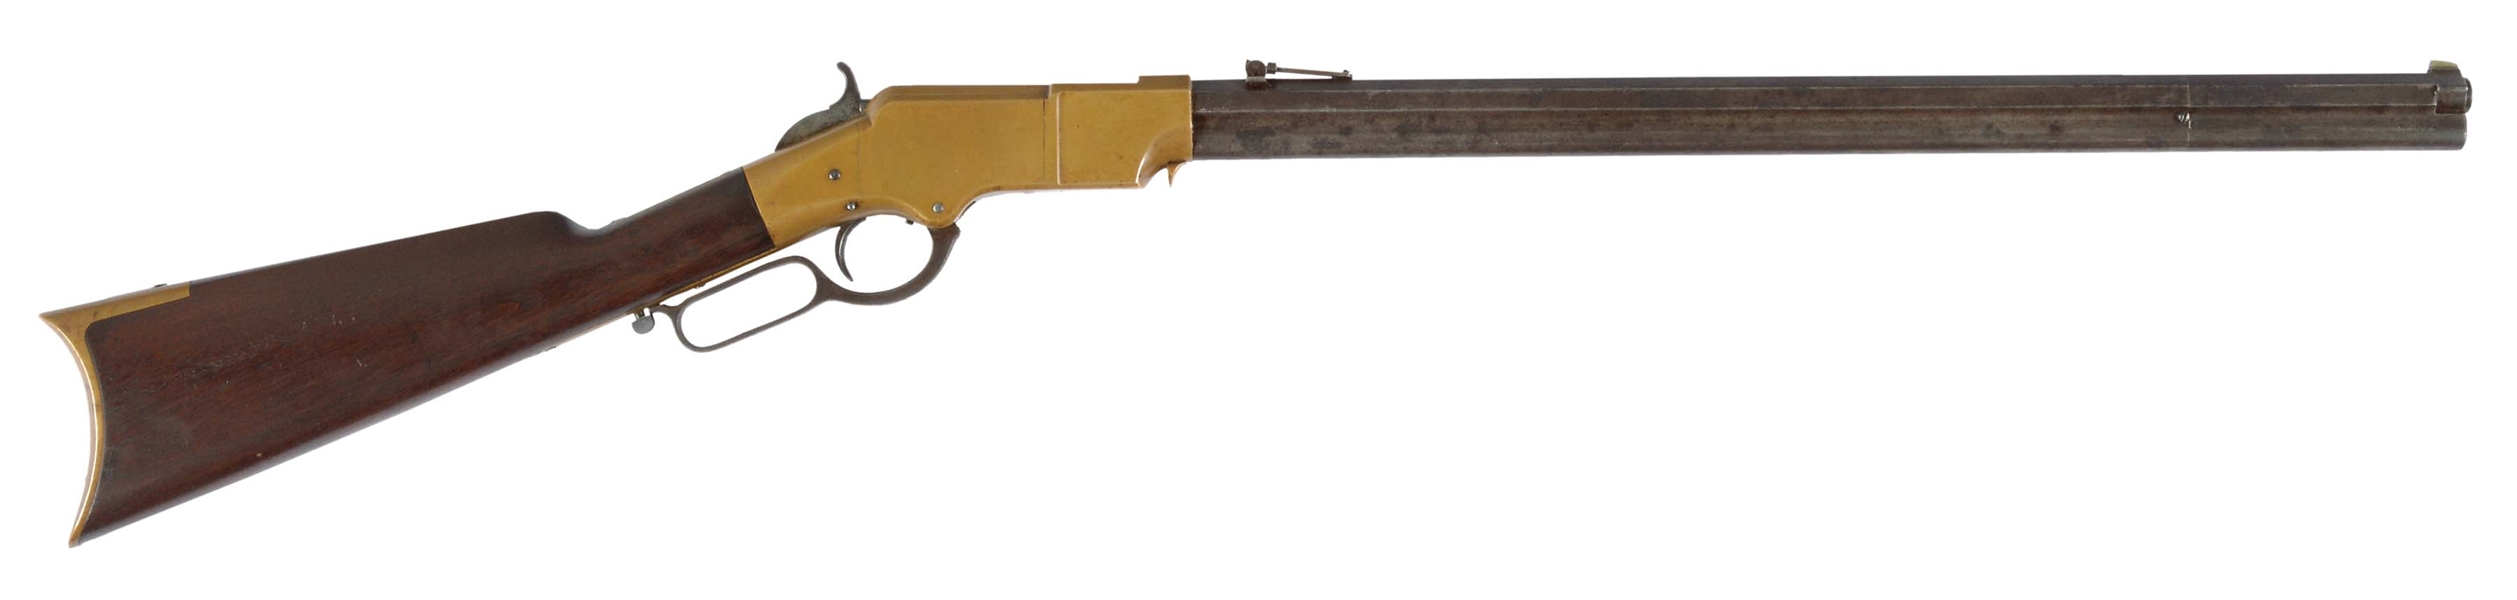 (A) NEW HAVEN ARMS COMPANY HENRY LEVER ACTION RIFLE.